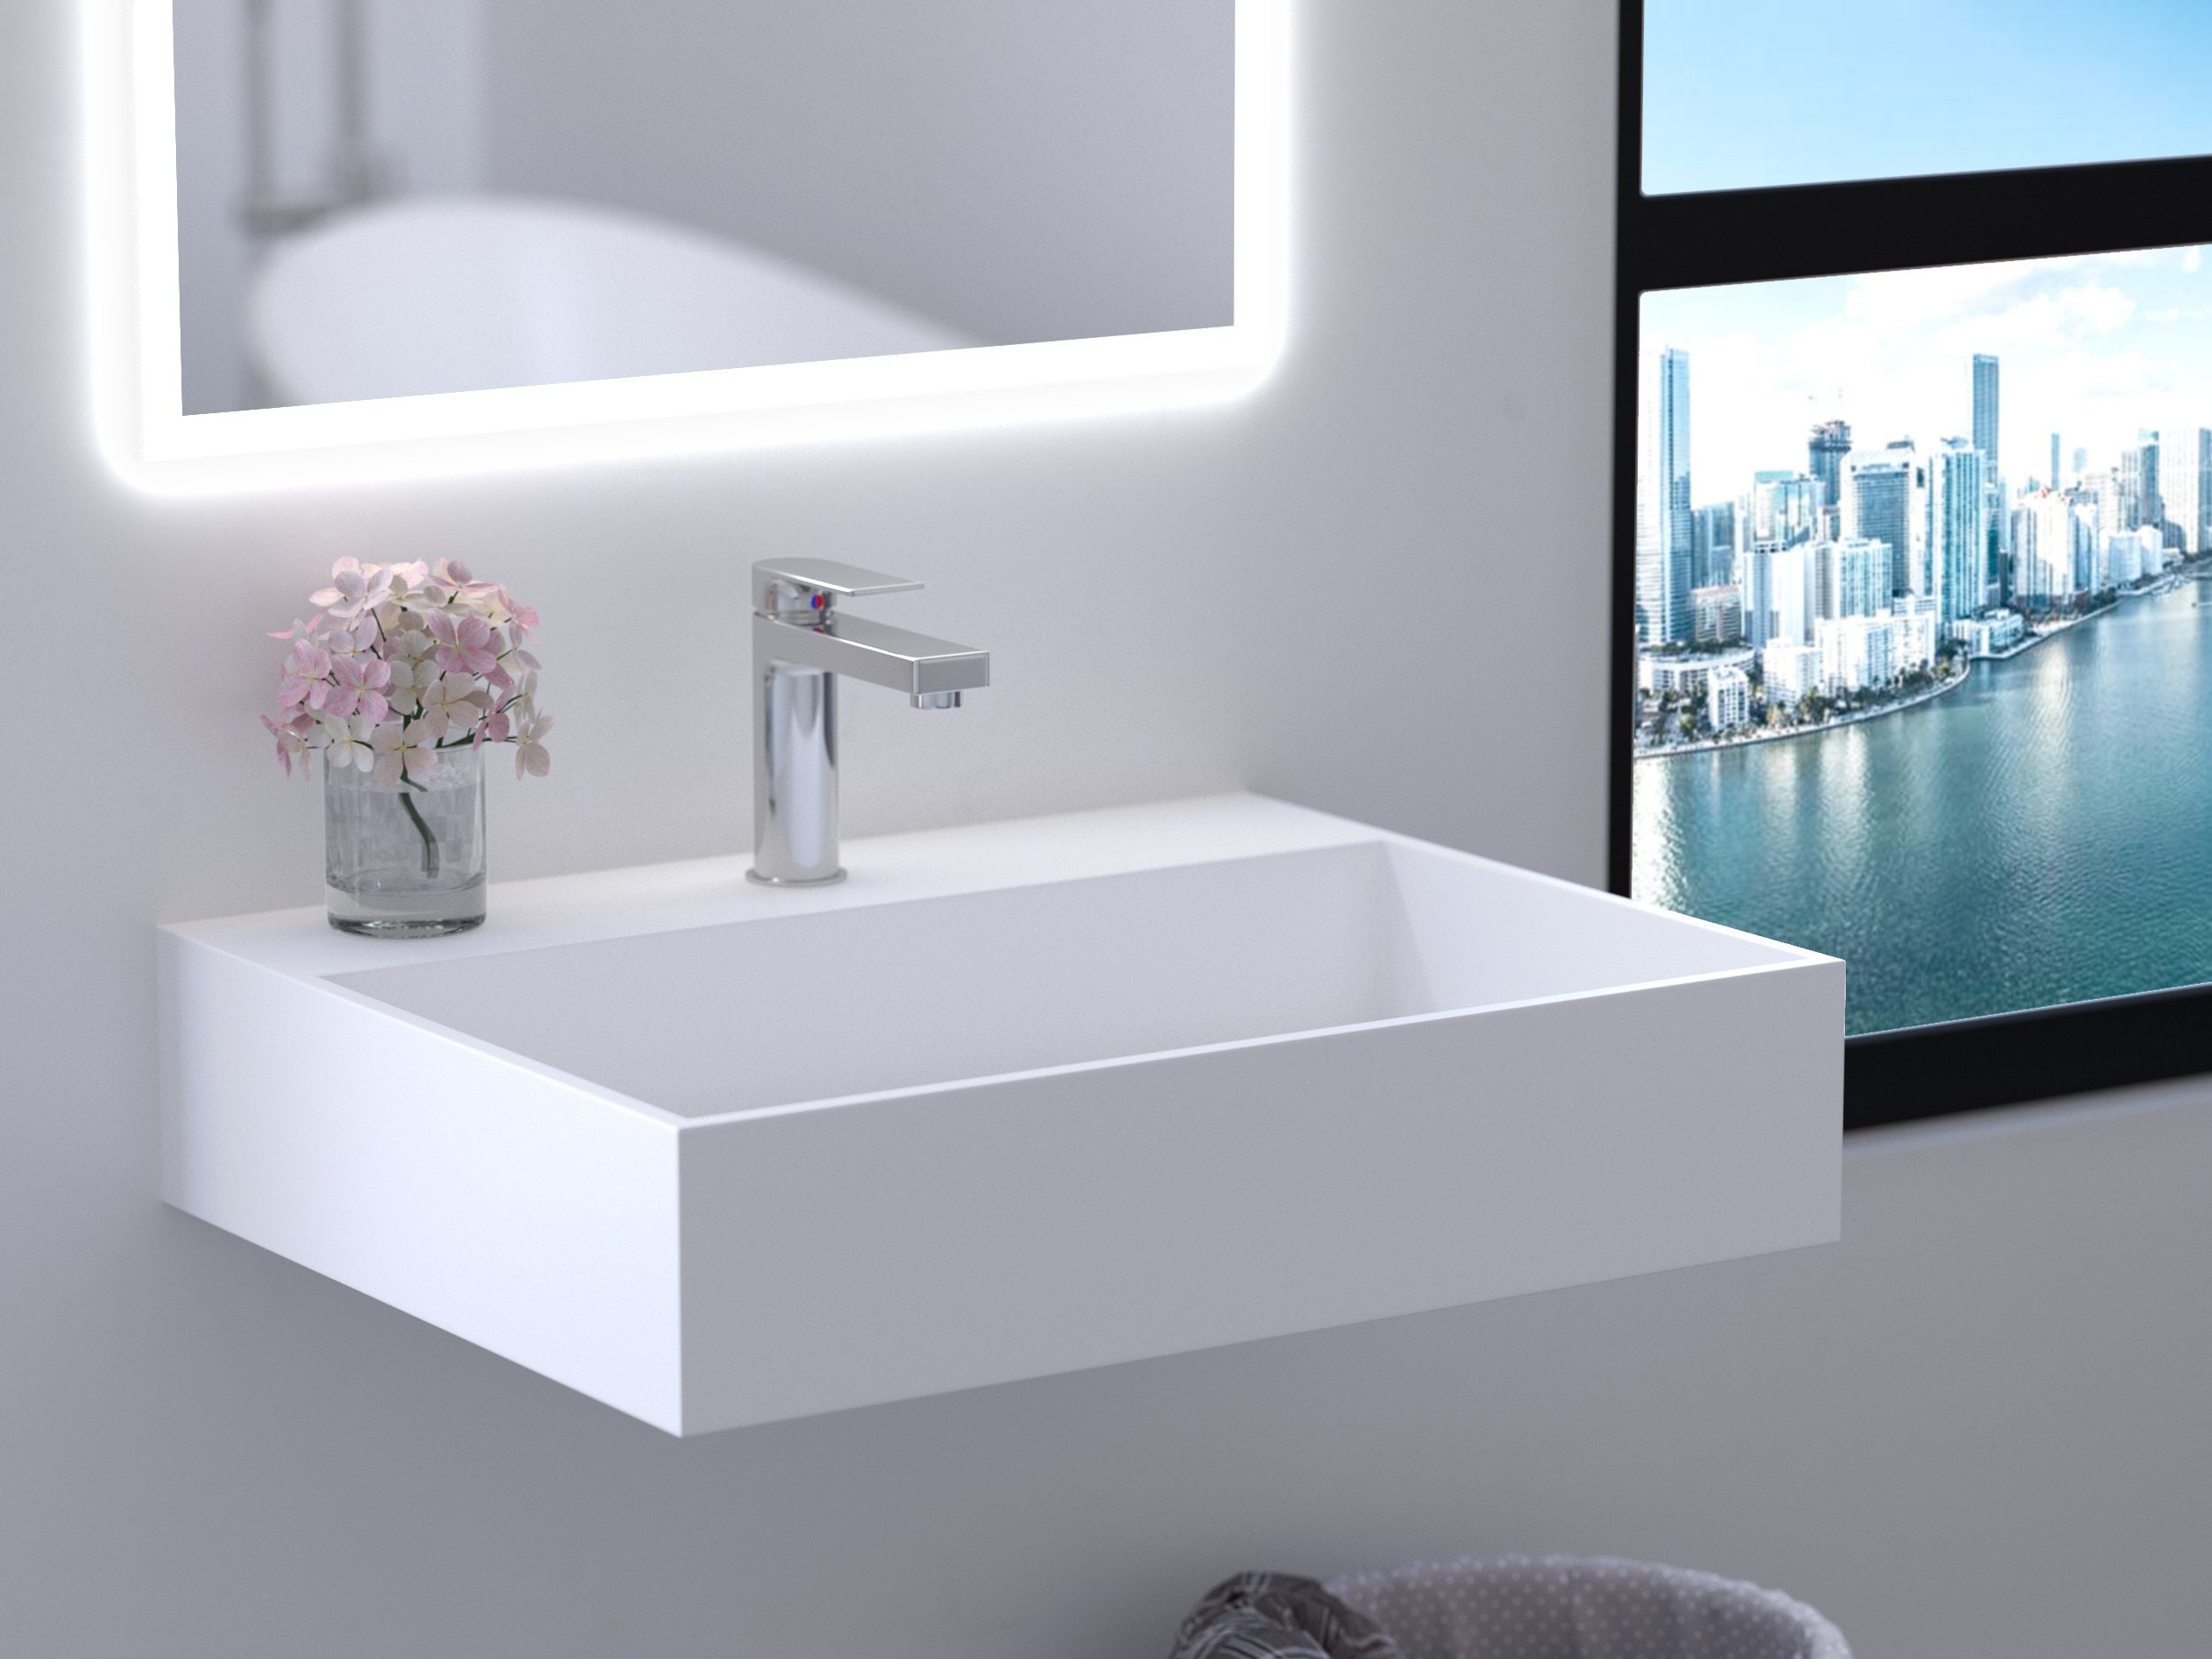 24 White Wall-mount Modern Small Floating Bathroom Sink Mounting Kit  Included, for Bathroom and Powder Rooms 